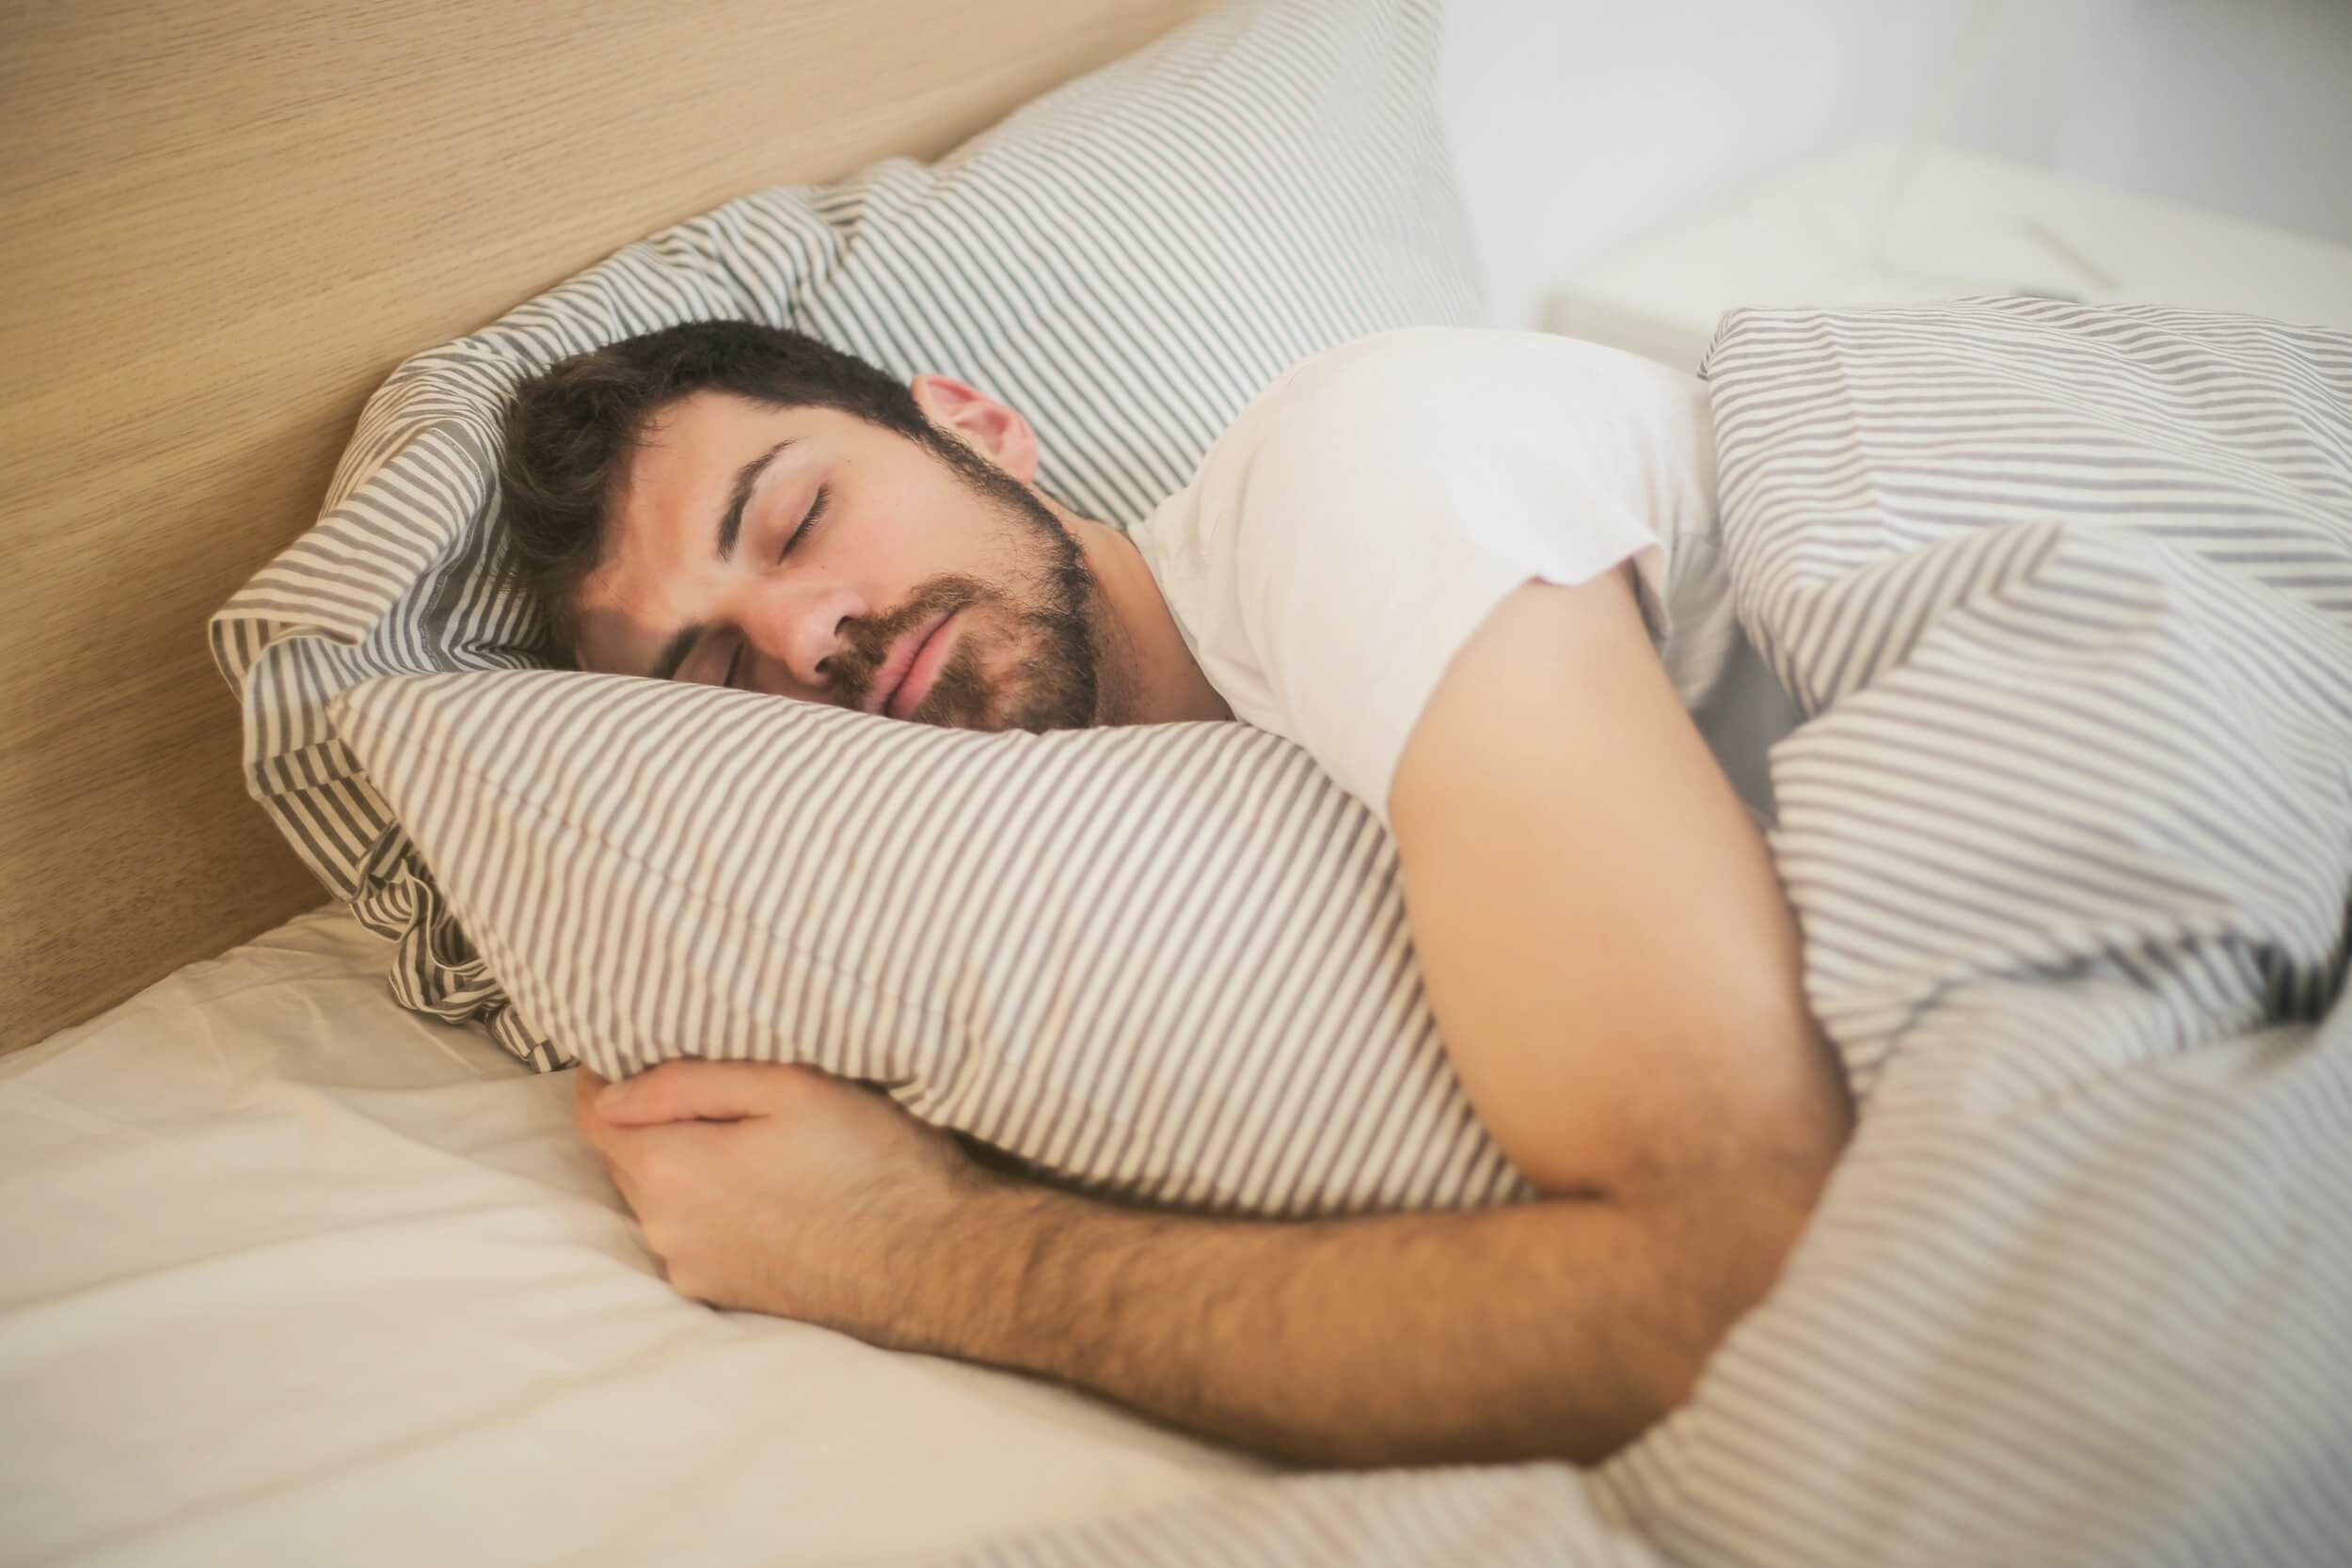 Bearded man sleeping in bed with stripy white sheets.